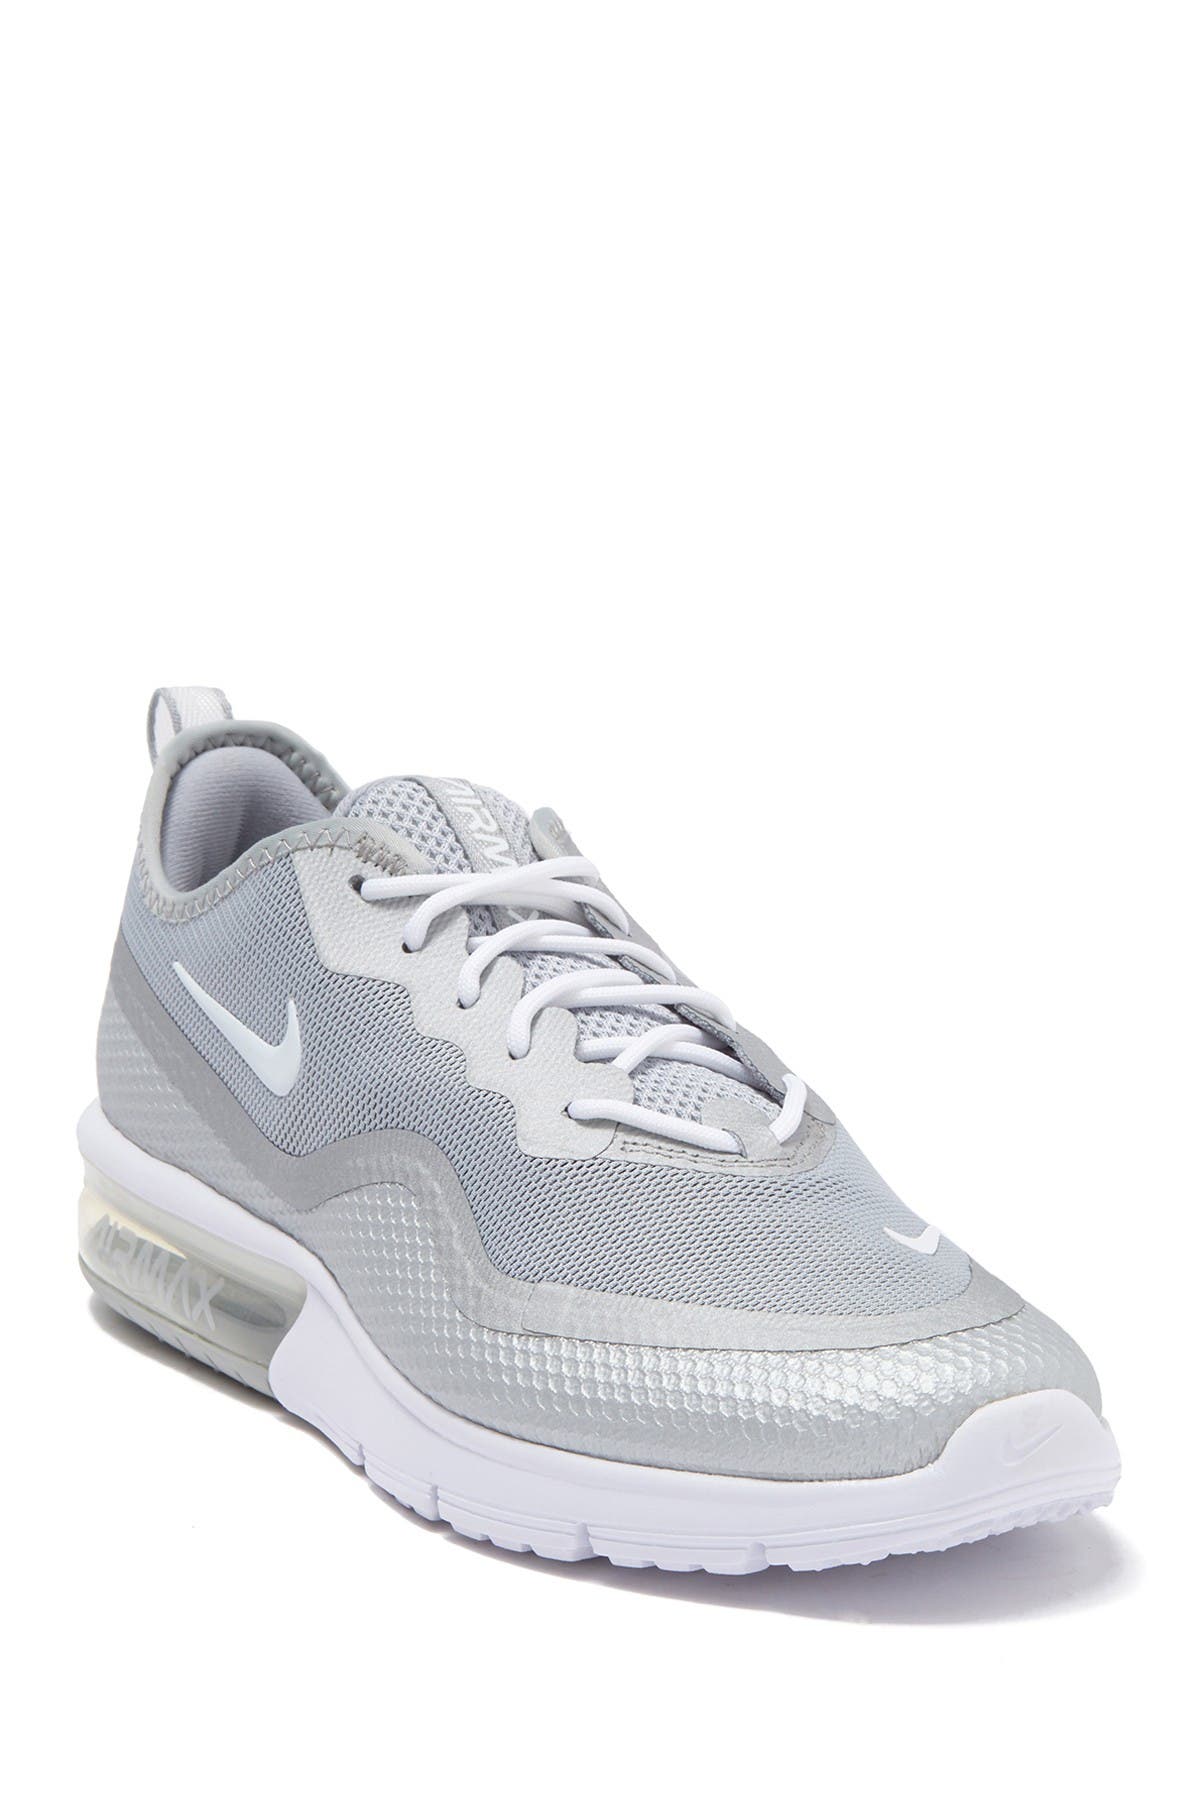 nike airmax sequent 4.5